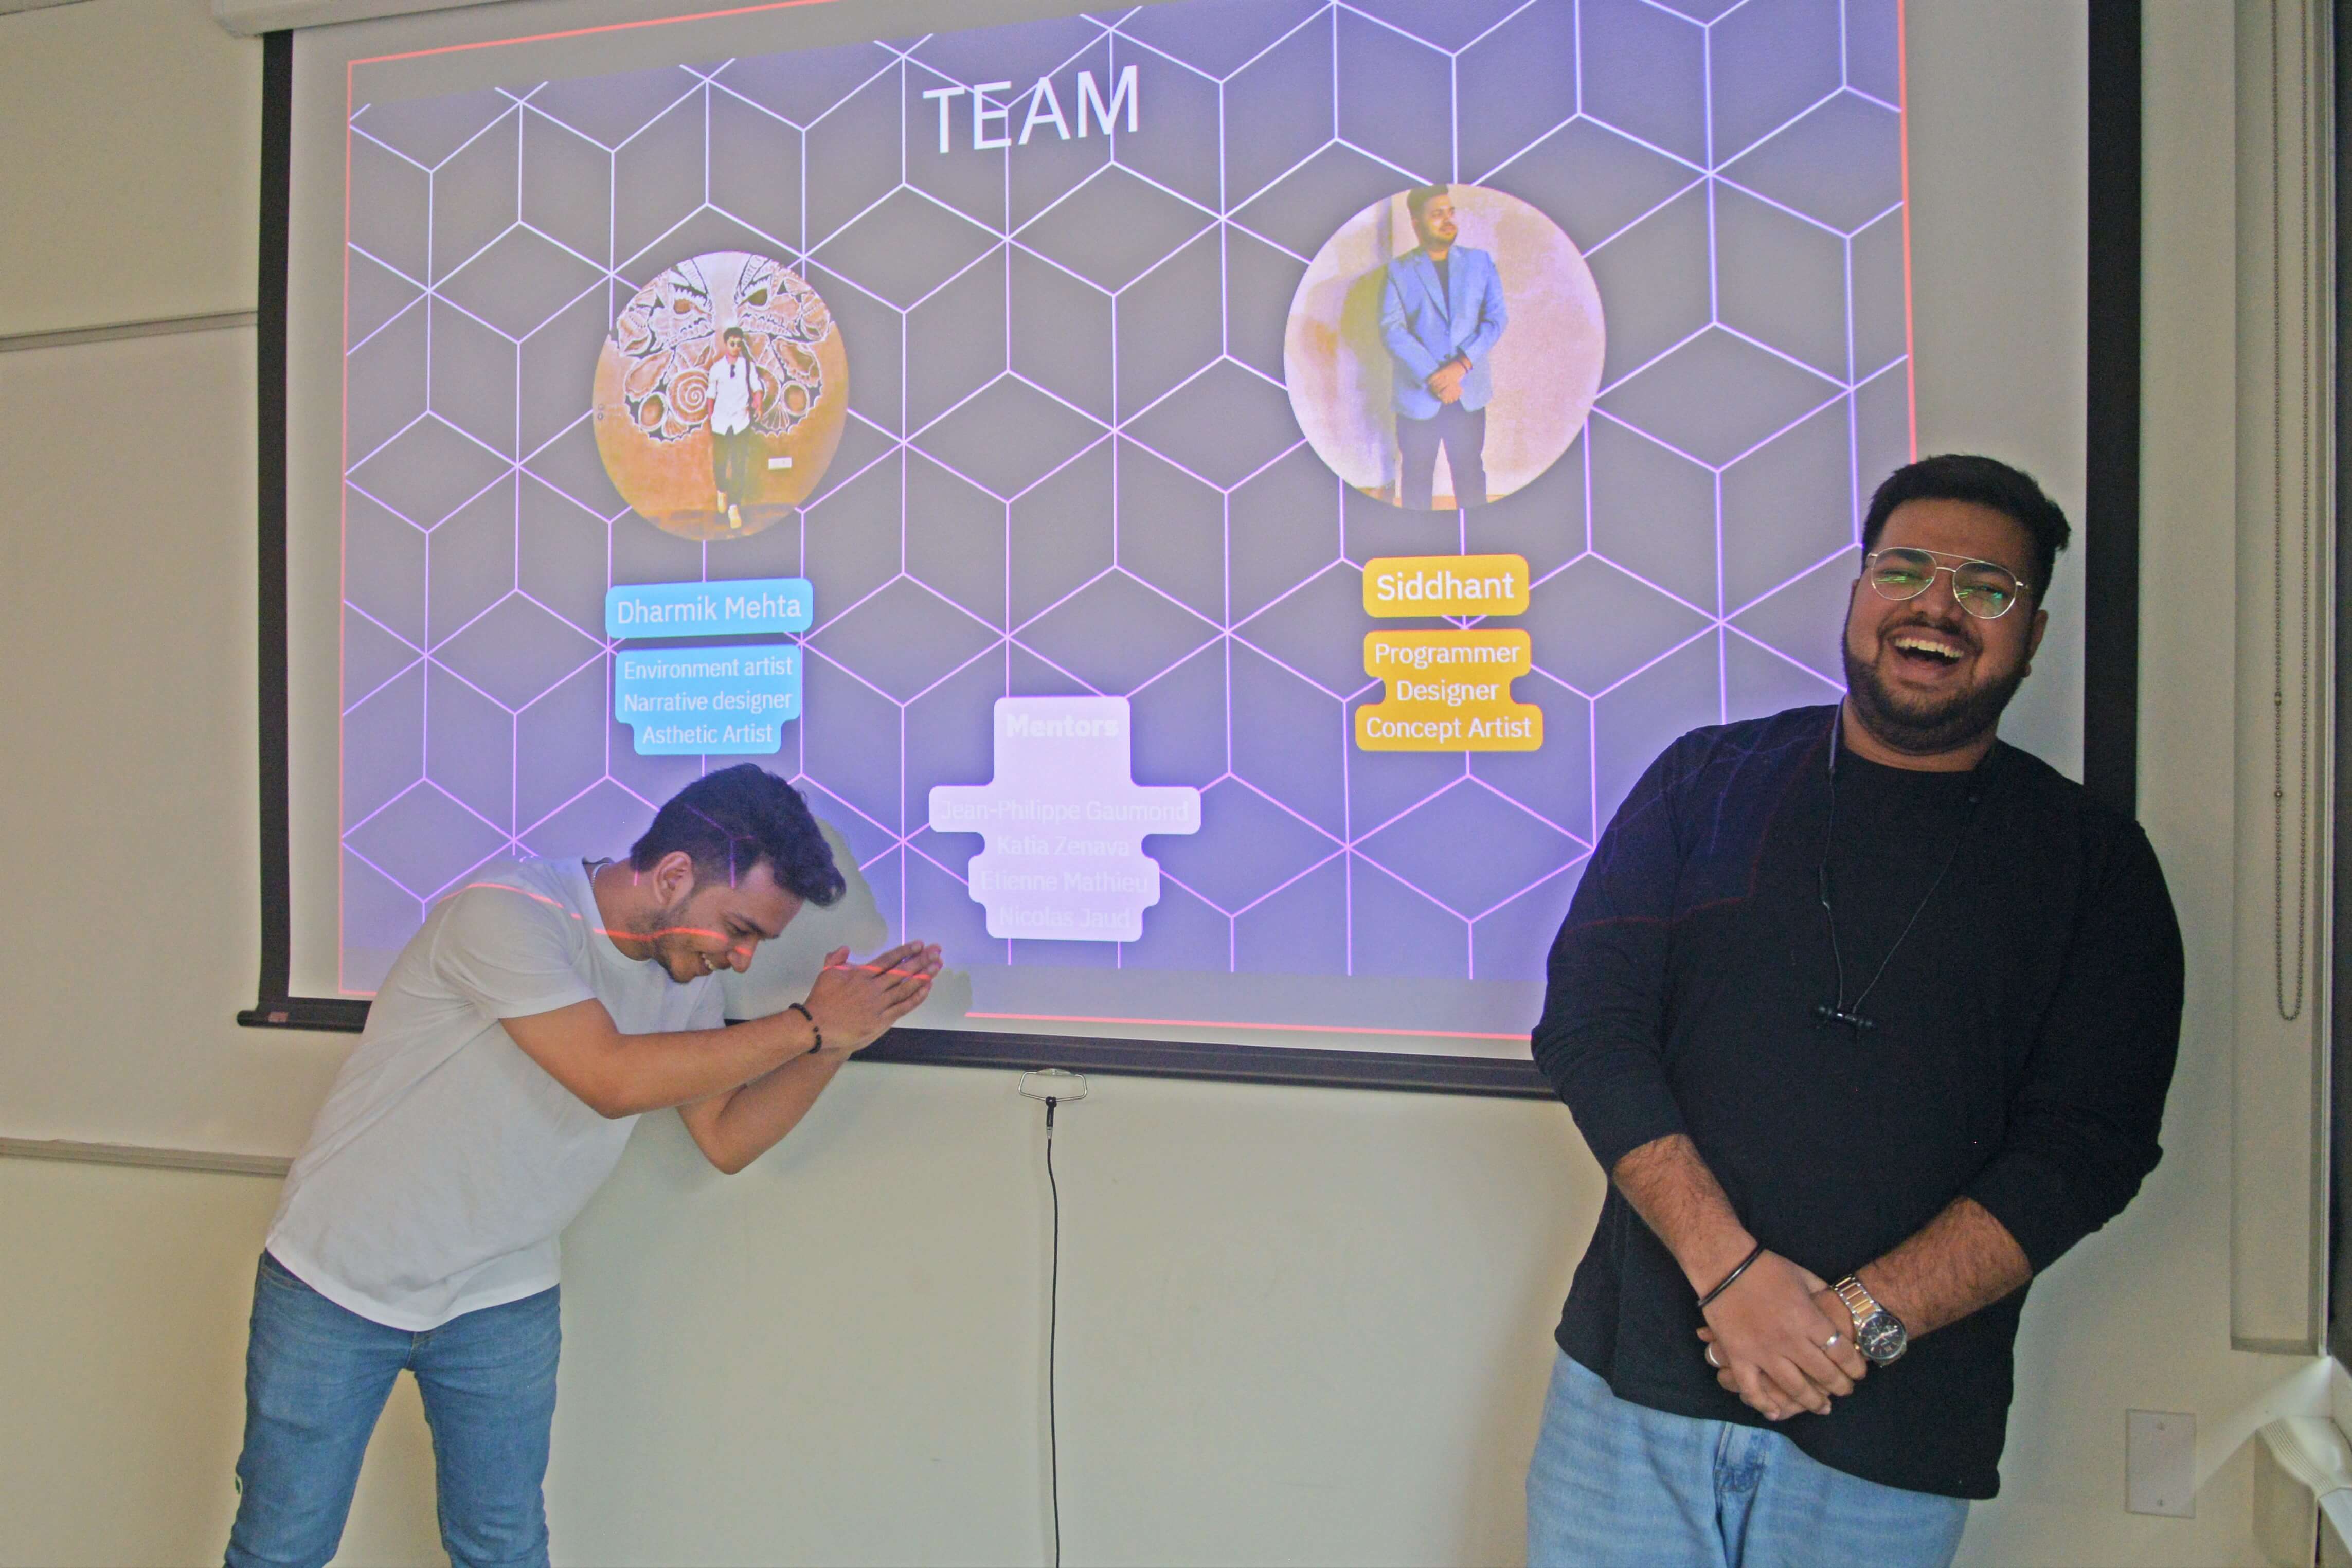 Two individuals presenting a team slide with personal profiles in a cheerful and interactive environment.